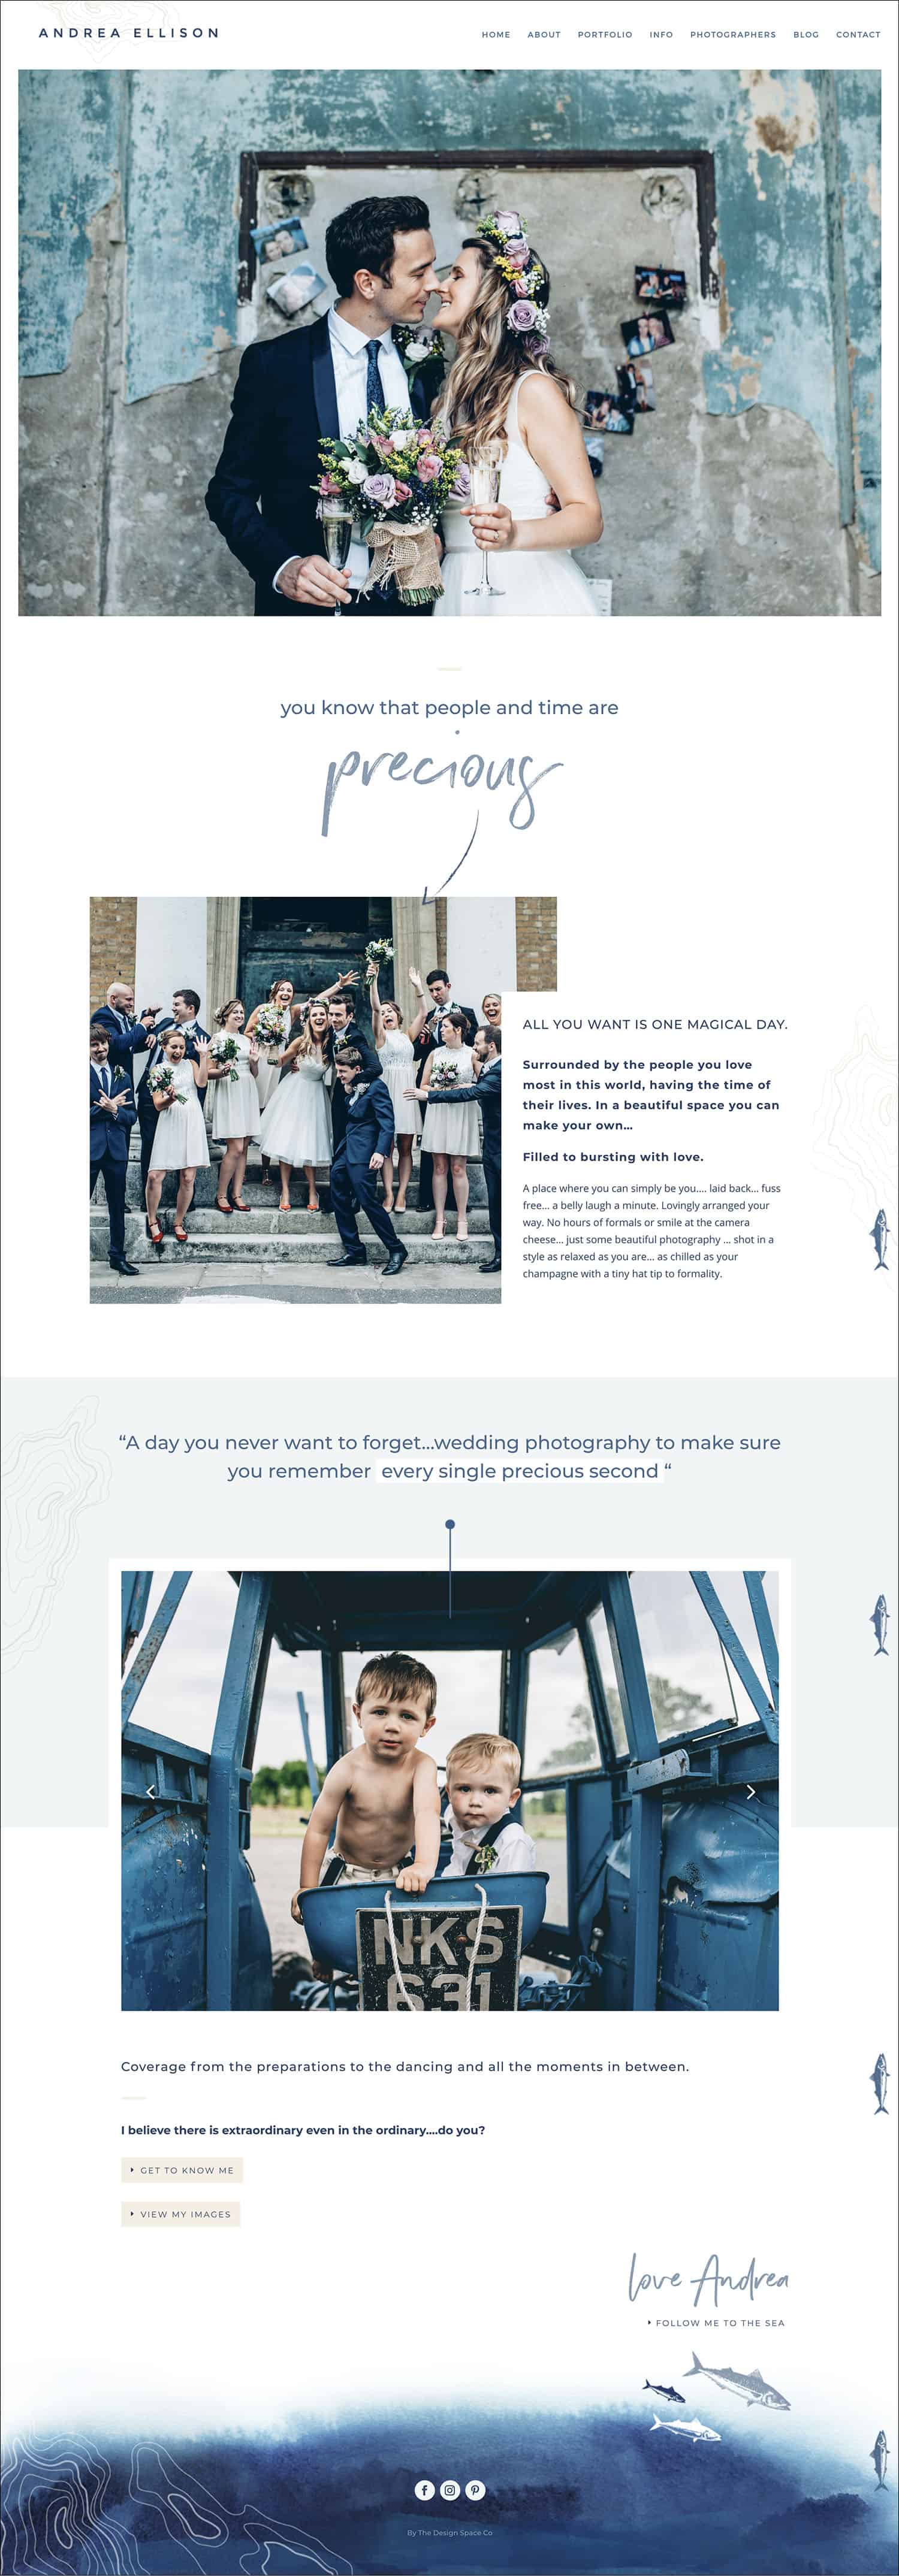 How To Make A Photography Website Your Dream Clients Can’t Resist: Andrea Ellison's homepage delivers a clear call to action path that leads visitors precisely where she wants them to go.